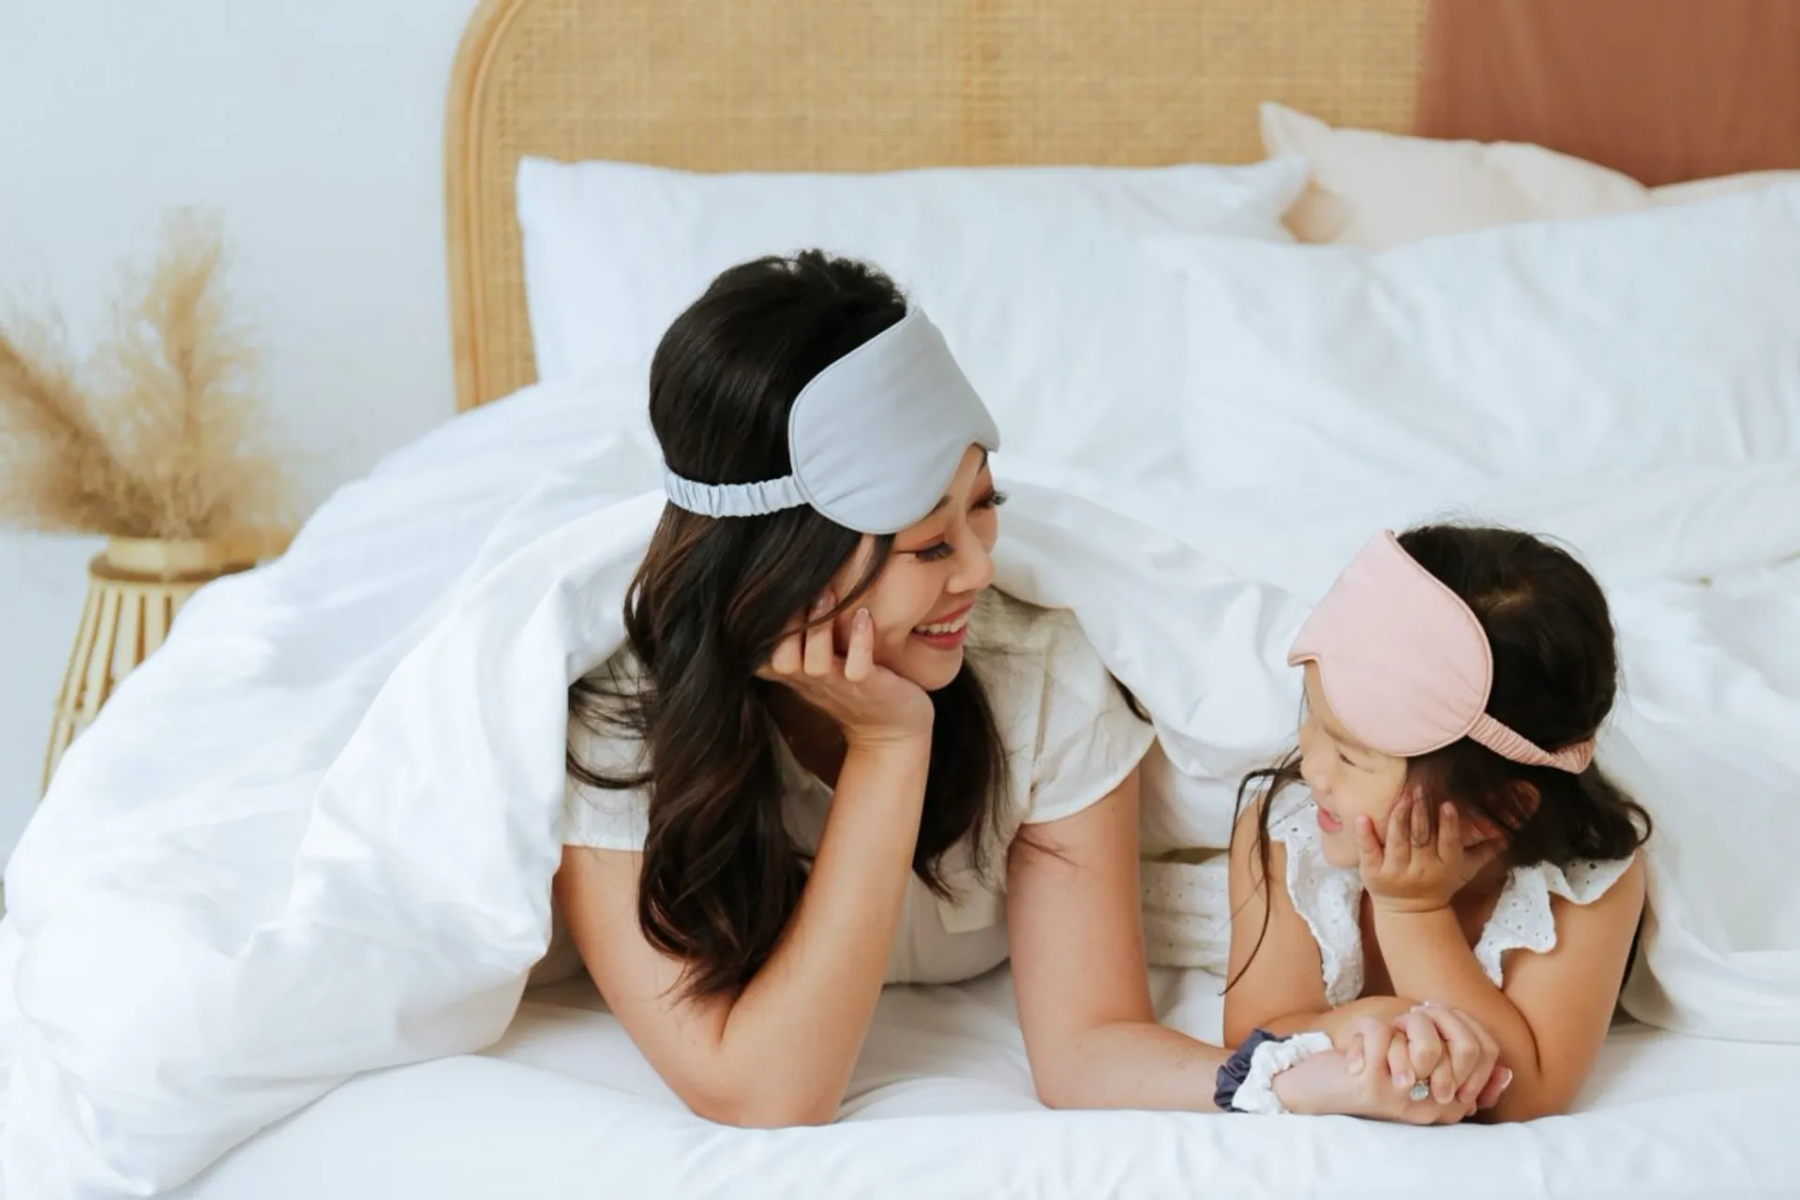 Joyce Lau started Naked Lab in 2018 to bring quality bedding for her then two-month-old daughter, who was battling serious eczema. Joyce Lau is pictured here with her daughter wearing Naked Lab eye masks.